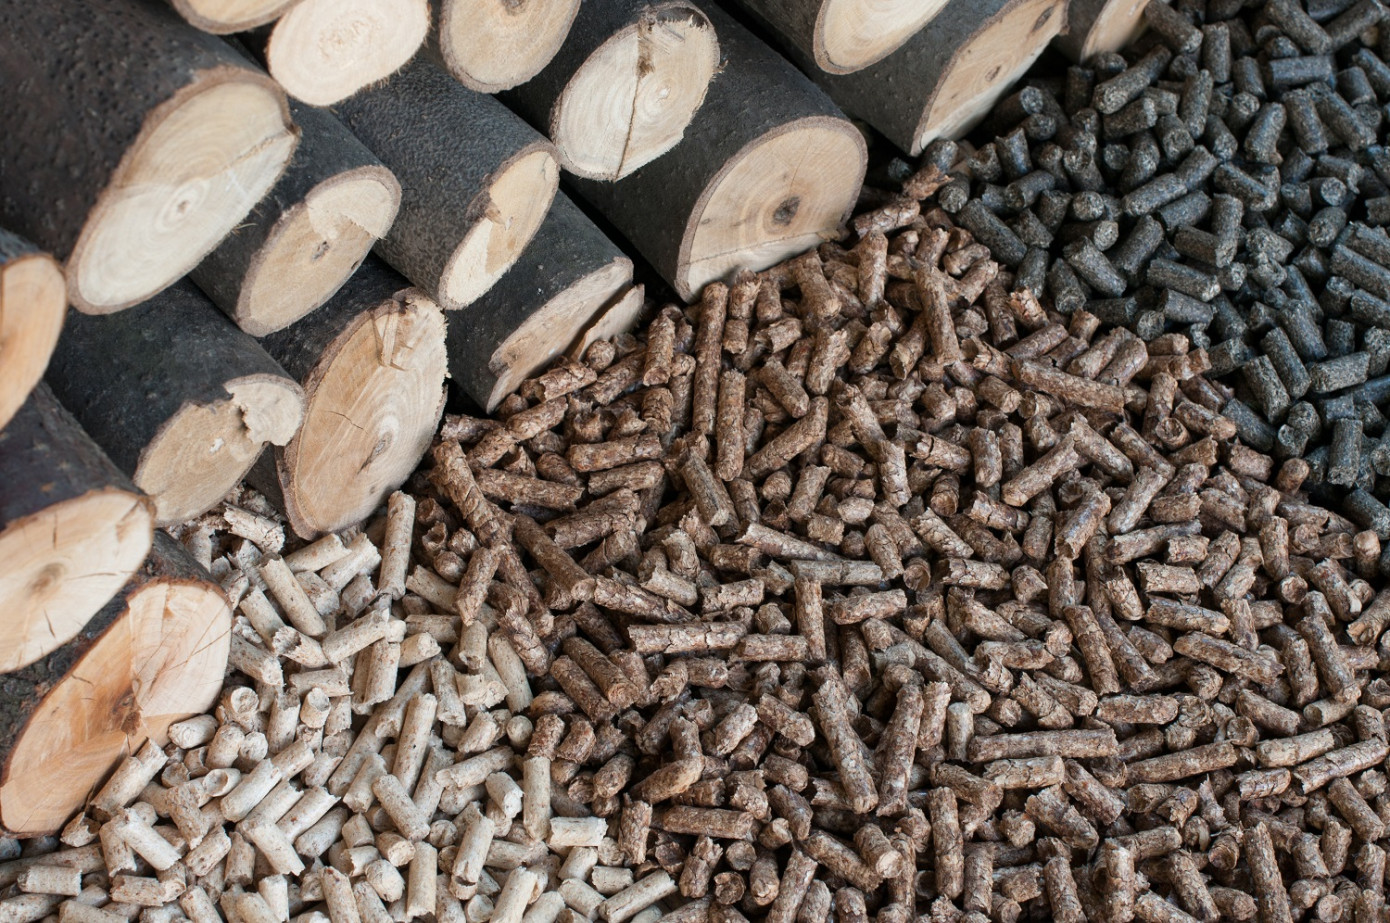 Exports of wood pellets from Canada increase 35% in February